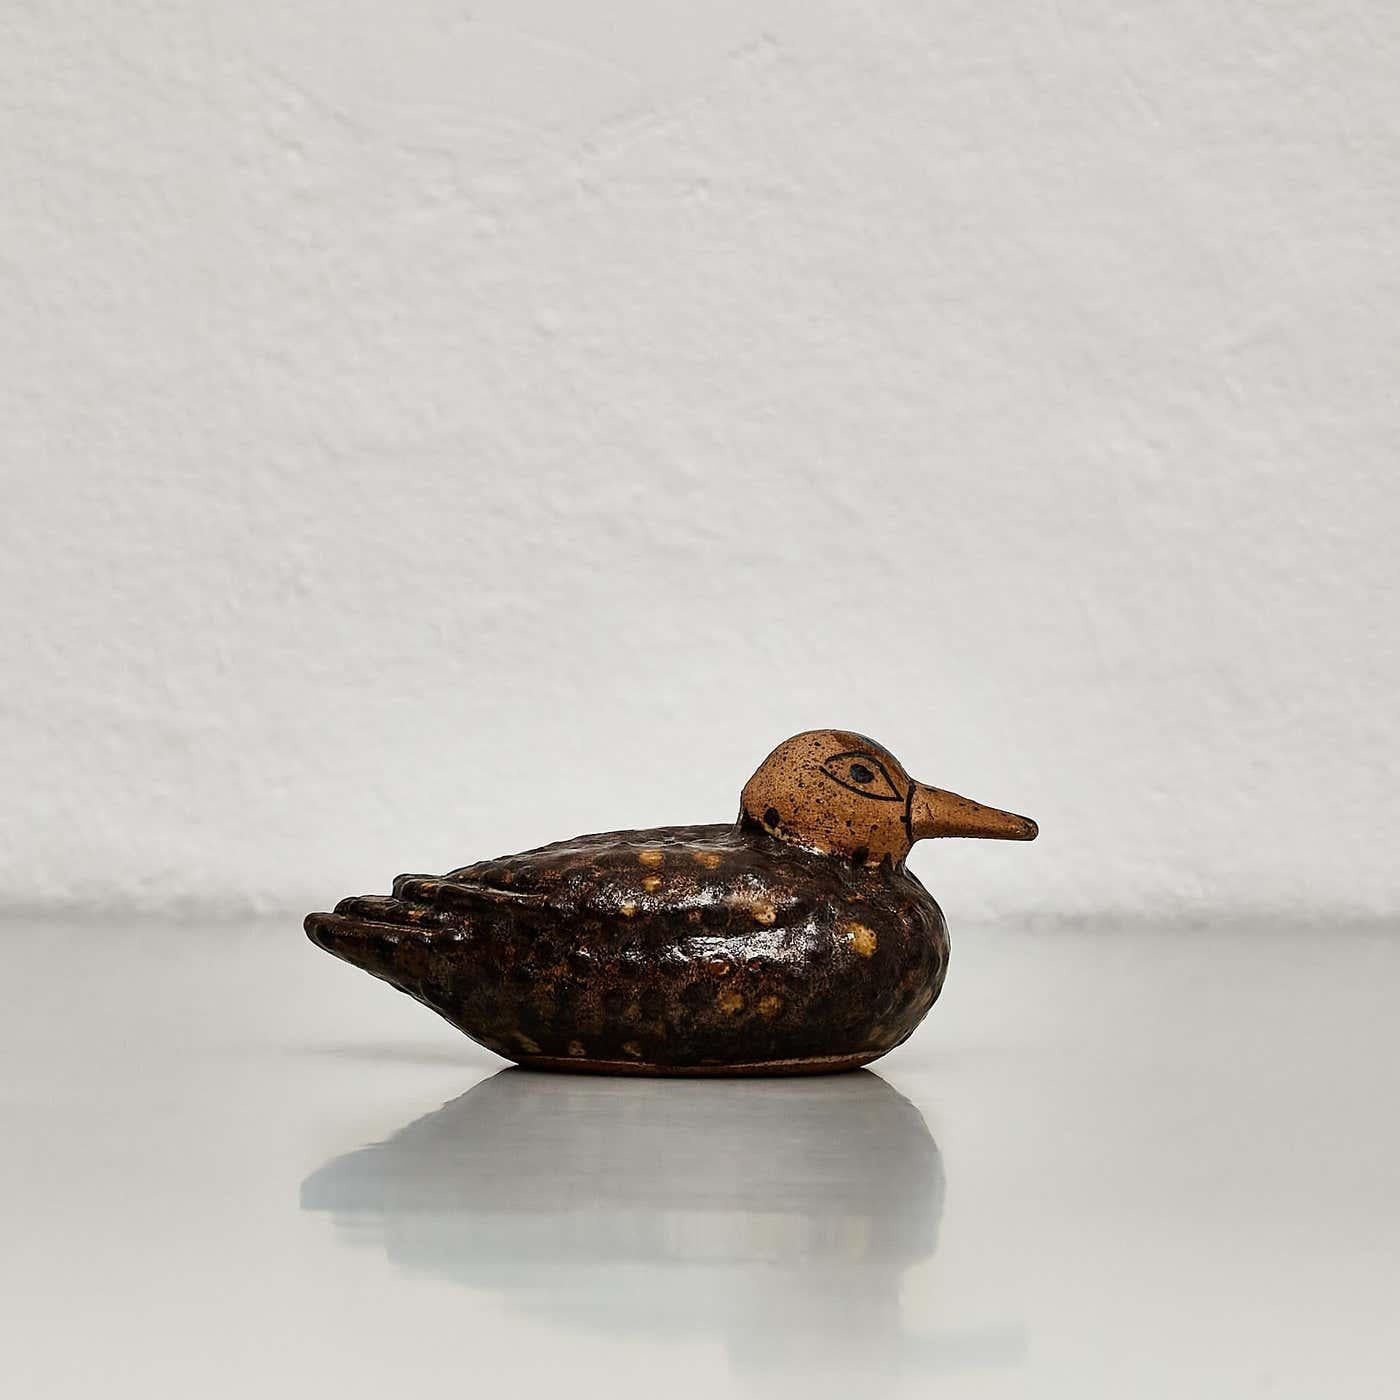 Charming Hand-Painted Ceramic Duck Sculpture - Naif Primitive Art, circa 1940 For Sale 6